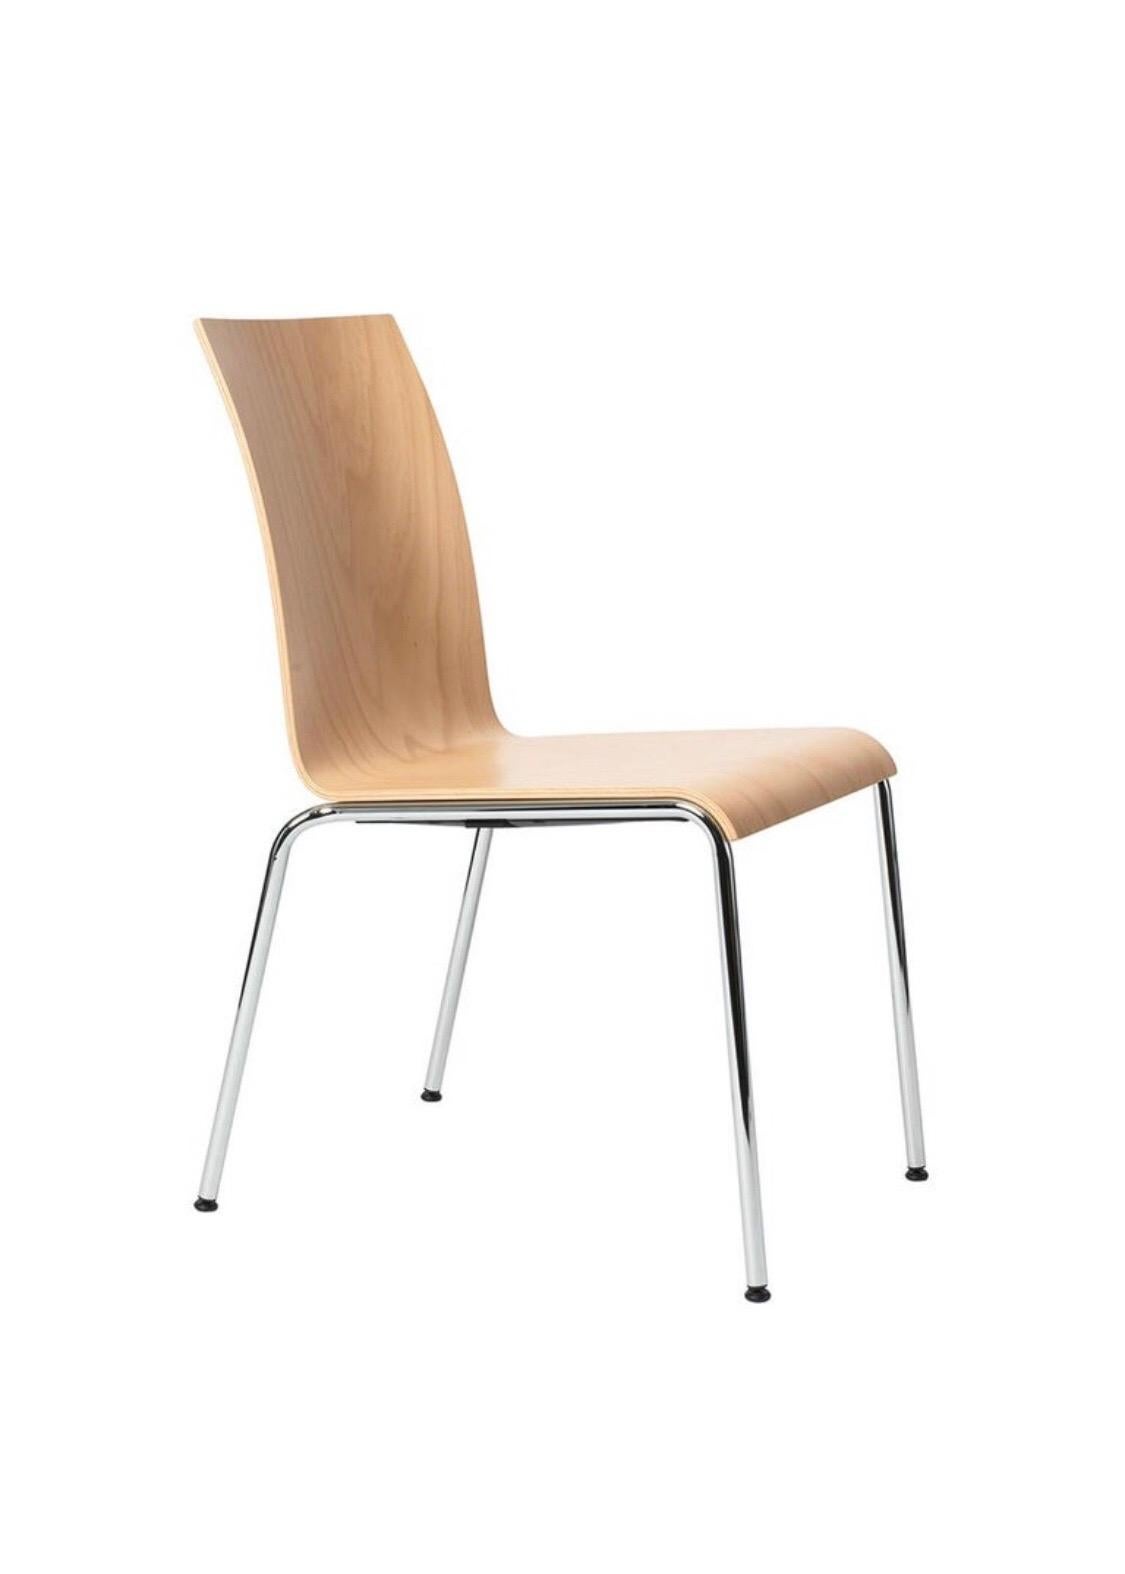 This set offers the highest comfort and a convincingly easy solution with elegant simplicity.

It is one of the most ergonomic and comfortable chairs on the market.

Some of its features include:

- FSC certified beechwood (sustainable